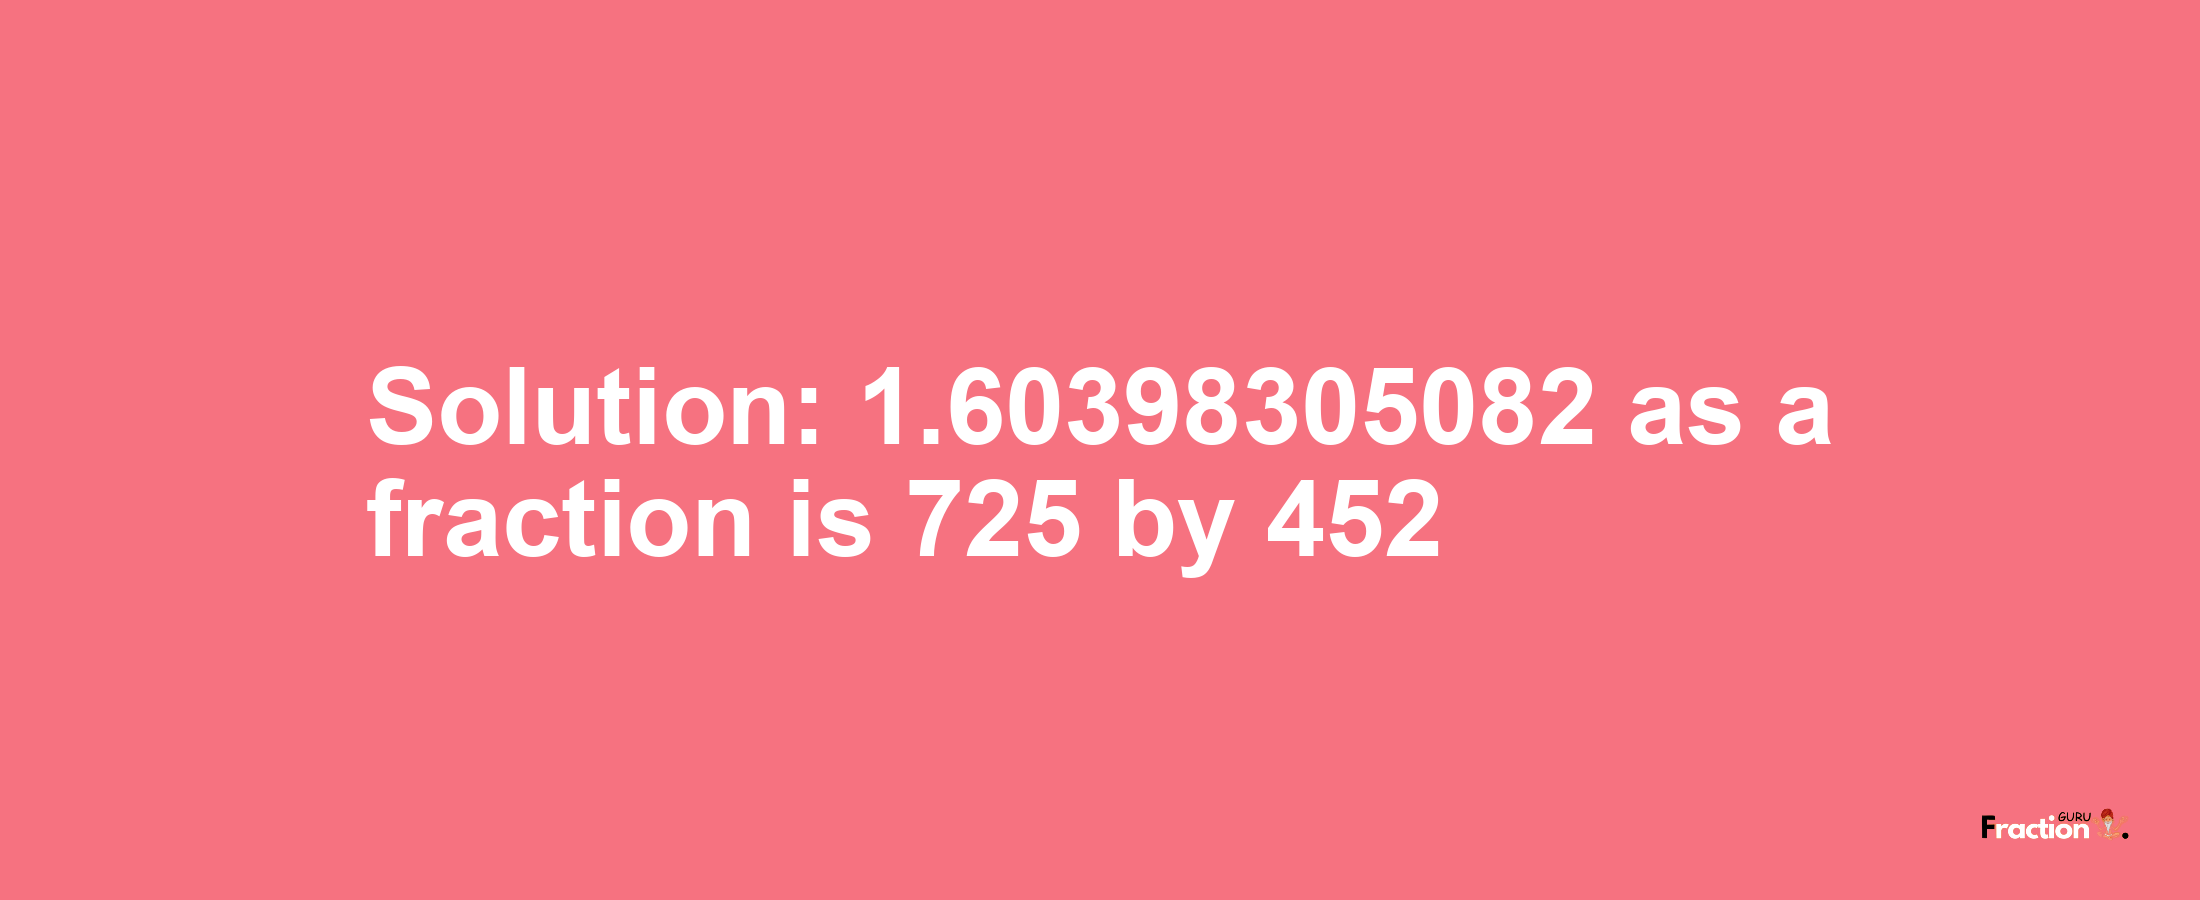 Solution:1.60398305082 as a fraction is 725/452